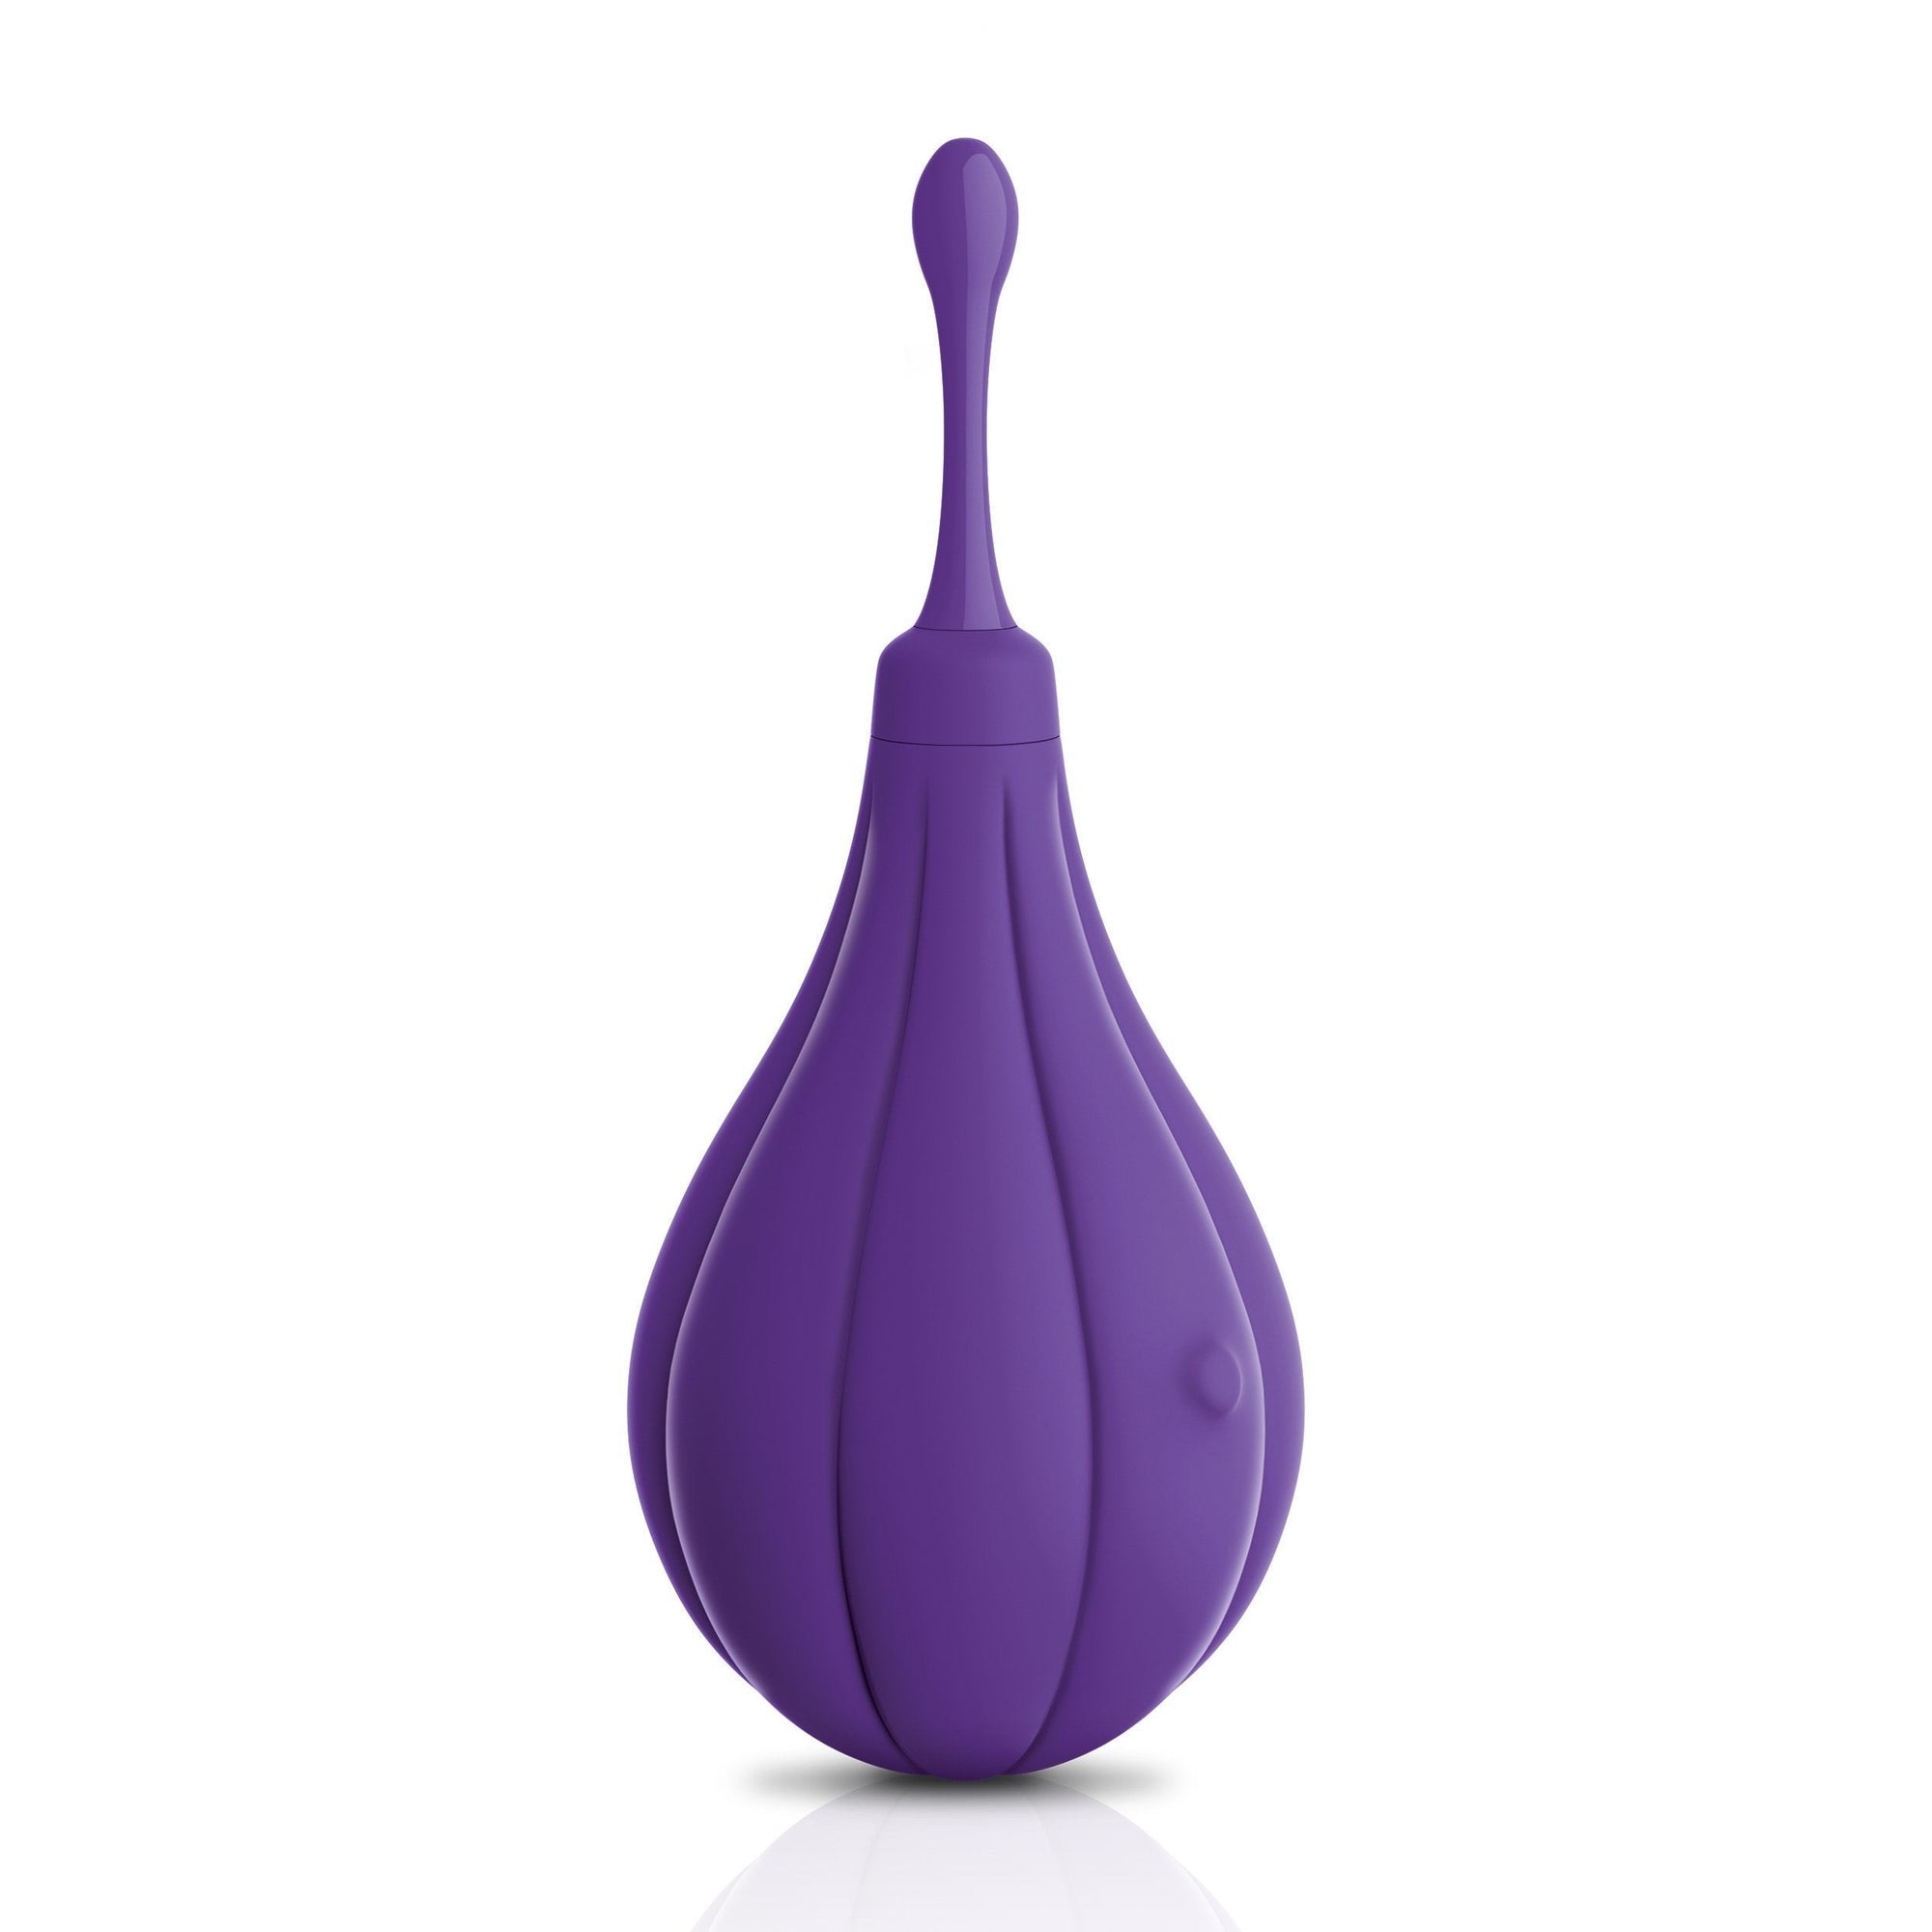 JimmyJane - Focus Sonic Vibrator with 3 Silicone Head Attachments (Purple) -  Clit Massager (Vibration) Rechargeable  Durio.sg